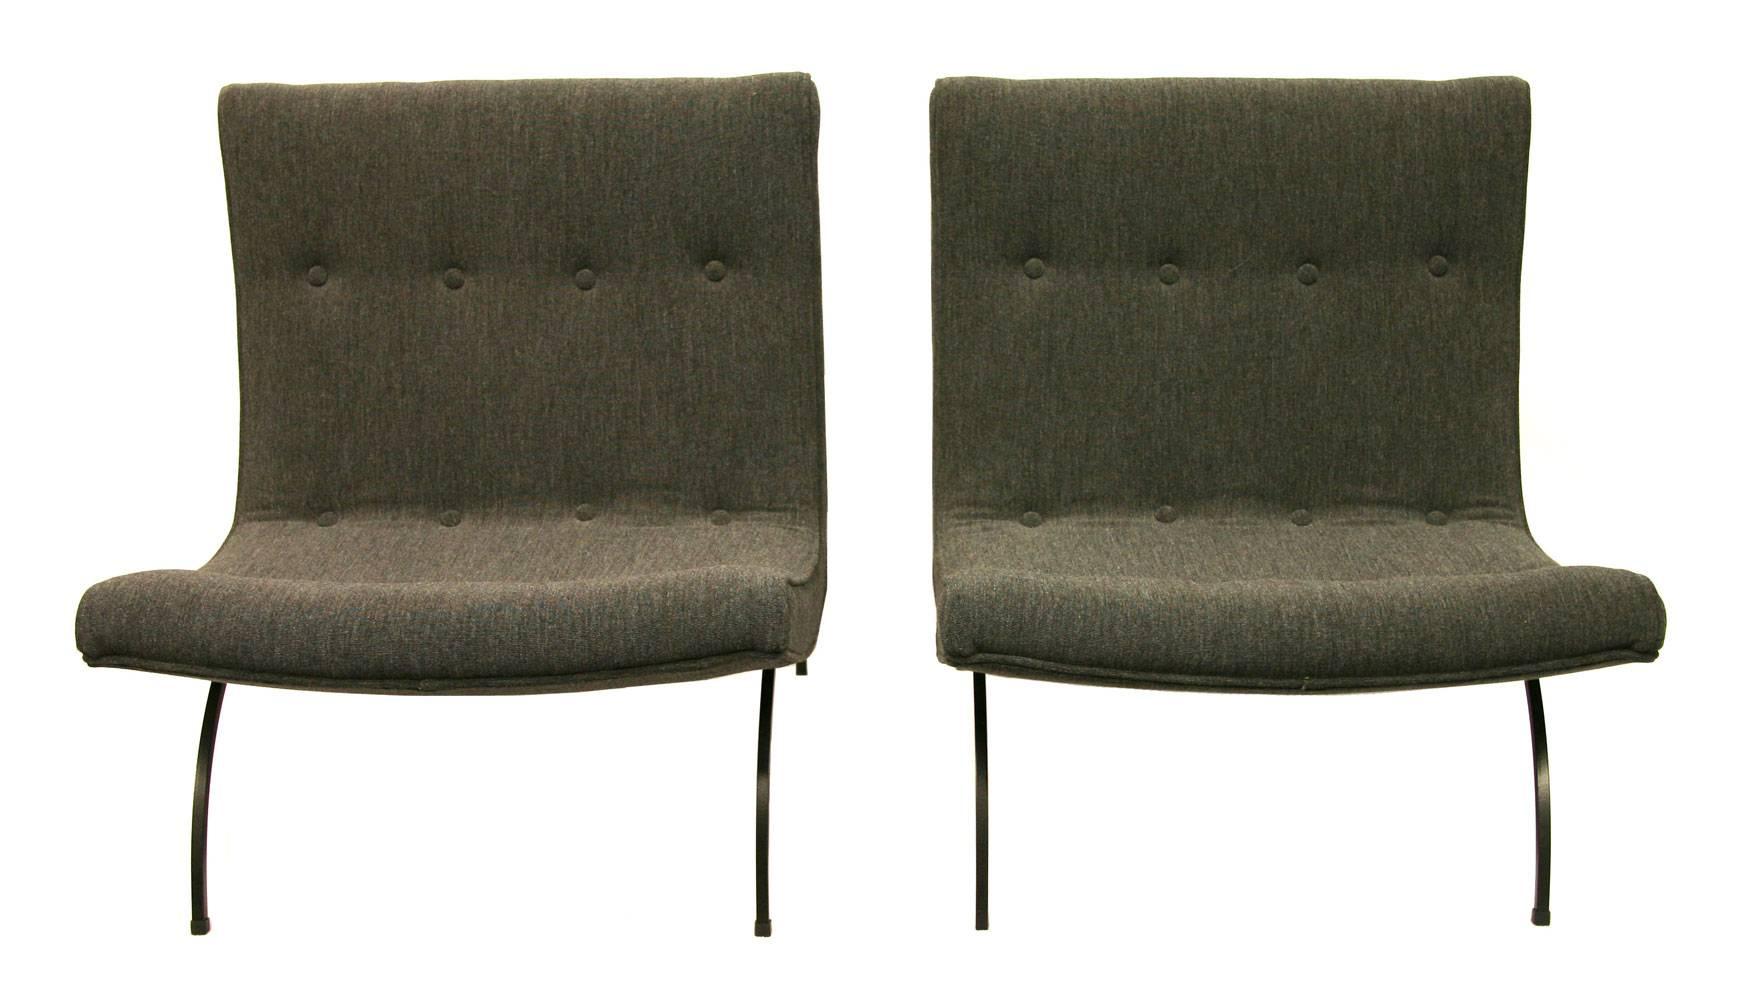 Mid-20th Century Pair of Milo Baughman Scoop Chairs For Sale